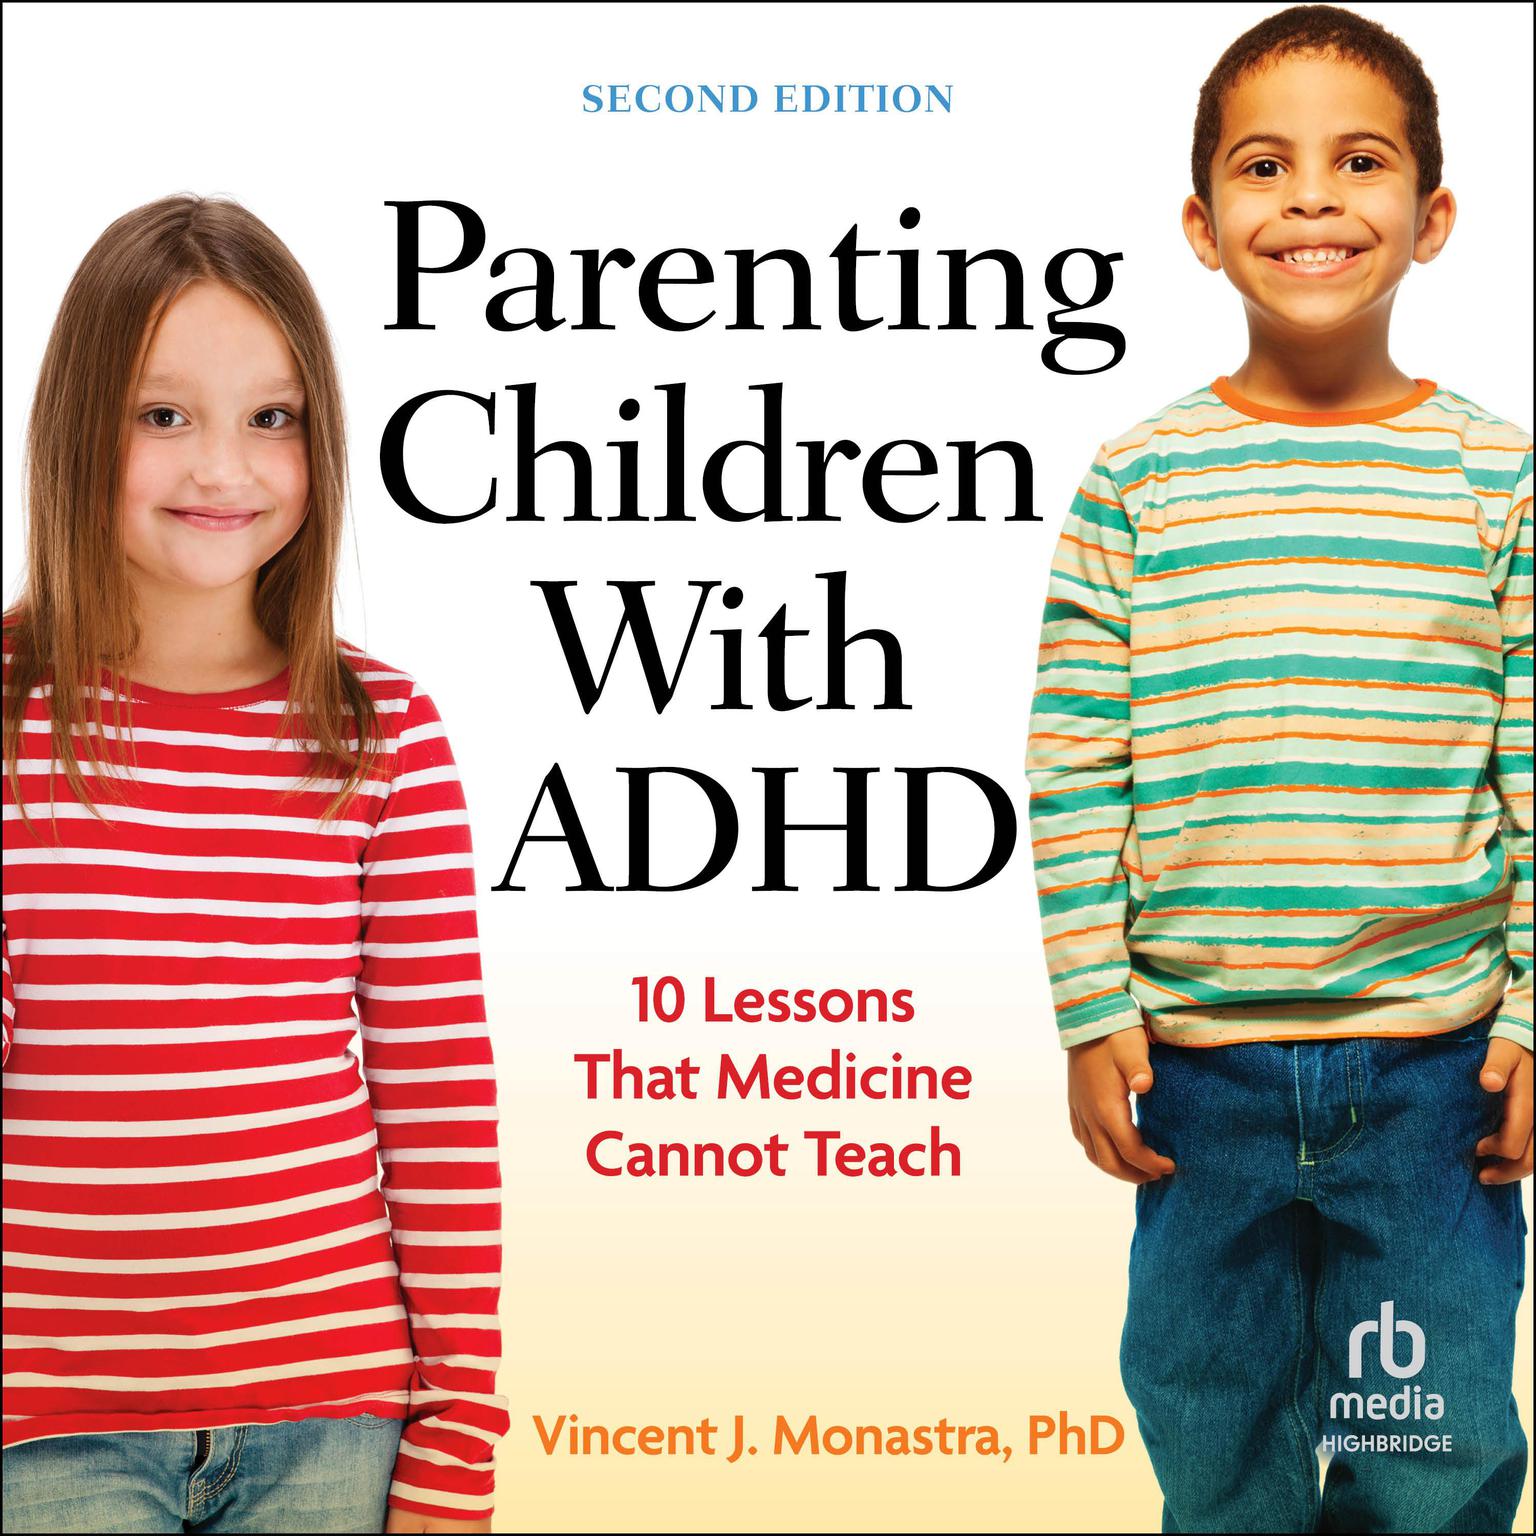 Parenting Children With ADHD: 10 Lessons That Medicine Cannot Teach Audiobook, by Vincent J. Monastra